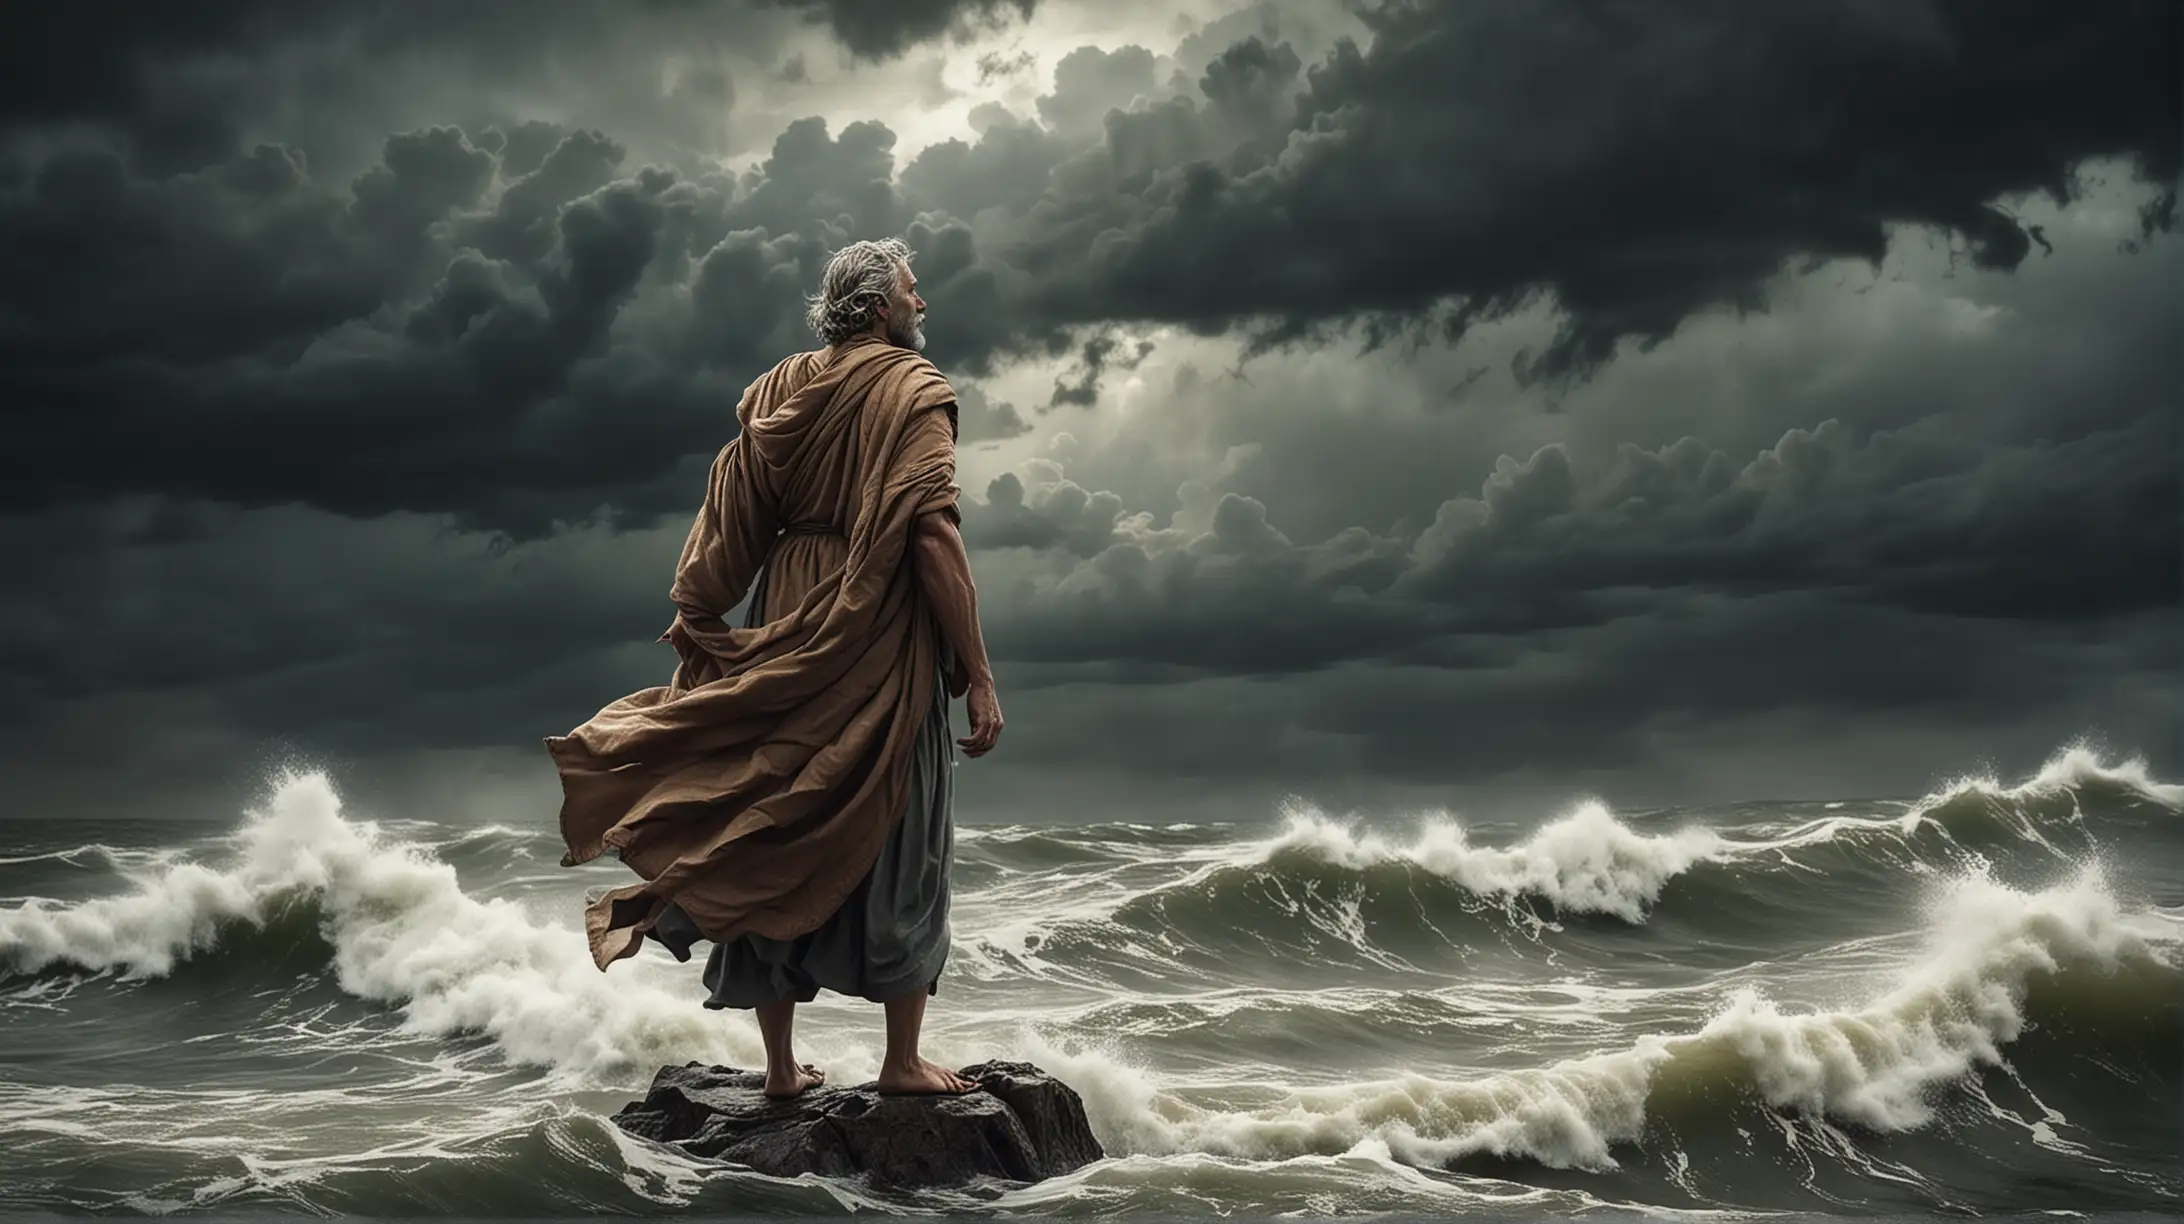 Illustrate a stoic philosopher leading by example, demonstrating resilience and fortitude in the face of adversity, inspiring others to persevere and maintain dignity in challenging circumstances.
Image Description: In this powerful image, a stoic philosopher is depicted standing tall amidst turbulent winds and stormy skies, symbolizing resilience and inner strength in the midst of adversity. Their unwavering posture and determined expression convey a message of courage and fortitude, inspiring others to overcome obstacles with grace and dignity.